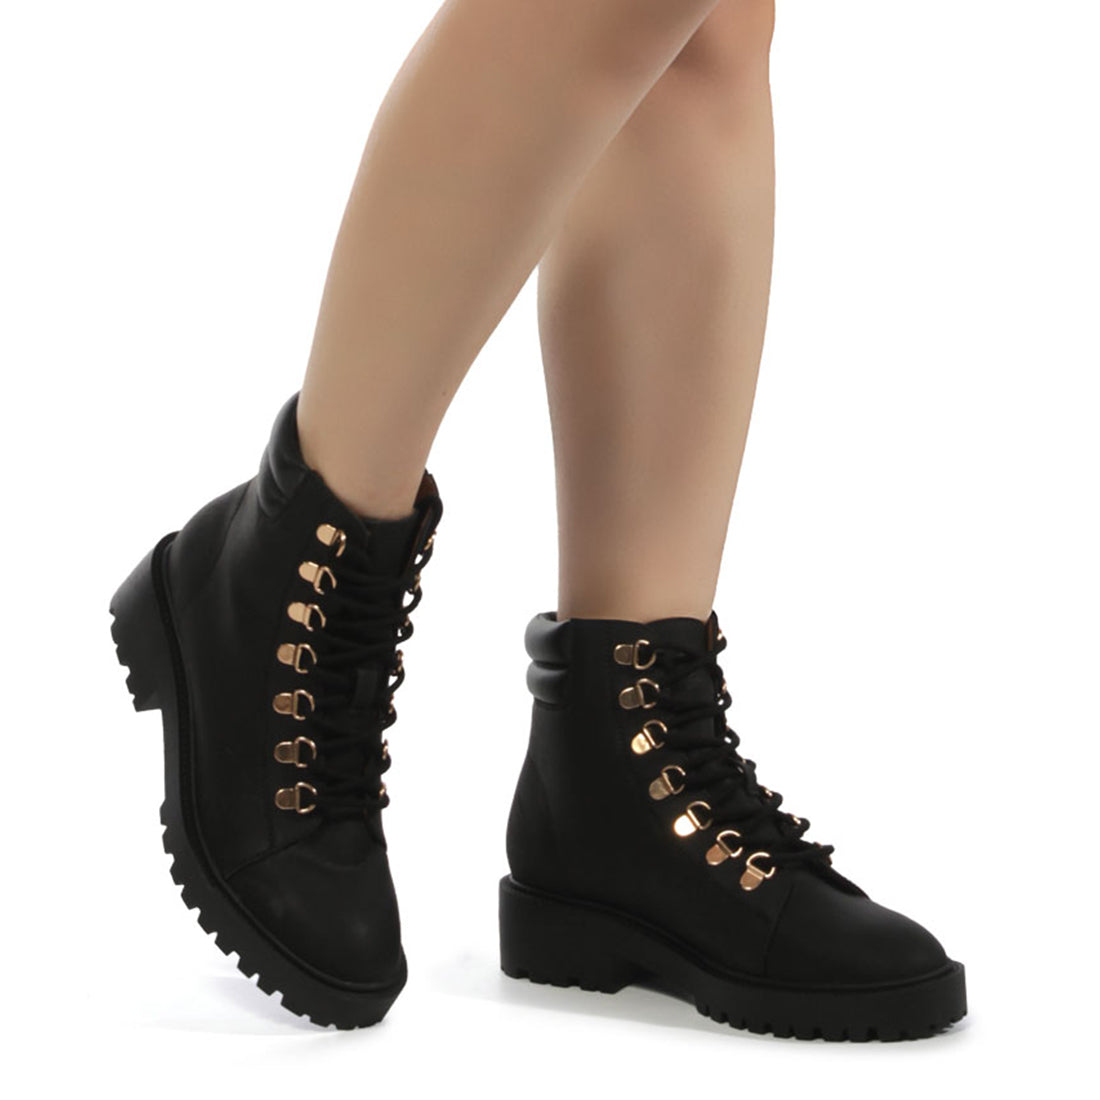 Black Smooth lace-Up Boot - UK8